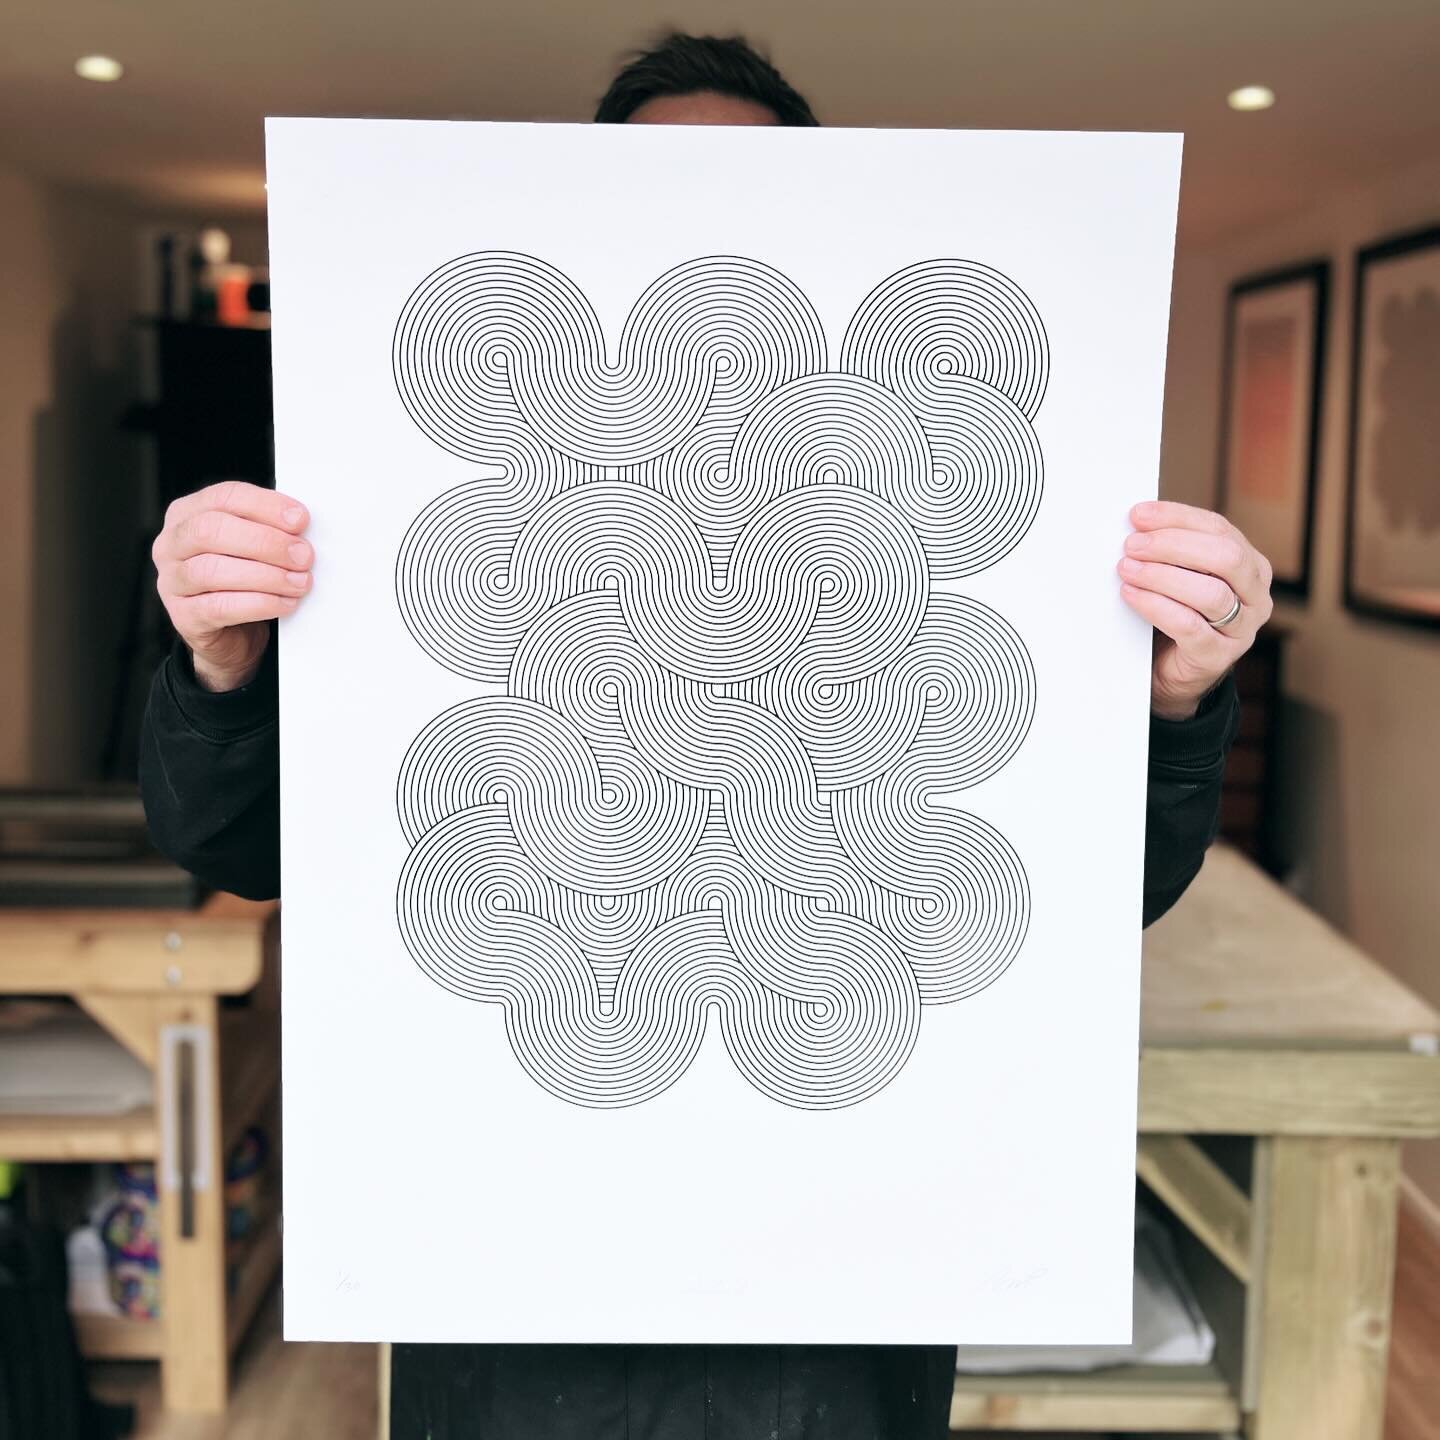 New print! 
&lsquo;Meander Black&rsquo;
&pound;75
1 colour hand-pulled screenprint
Printed on 280gsm Somerset Velvet Radiant White
Limited edition of 30
Signed, numbered and embossed 
Sold unframed
Shipping &pound;5

BUY THE SET - Buy with &lsquo;Mea